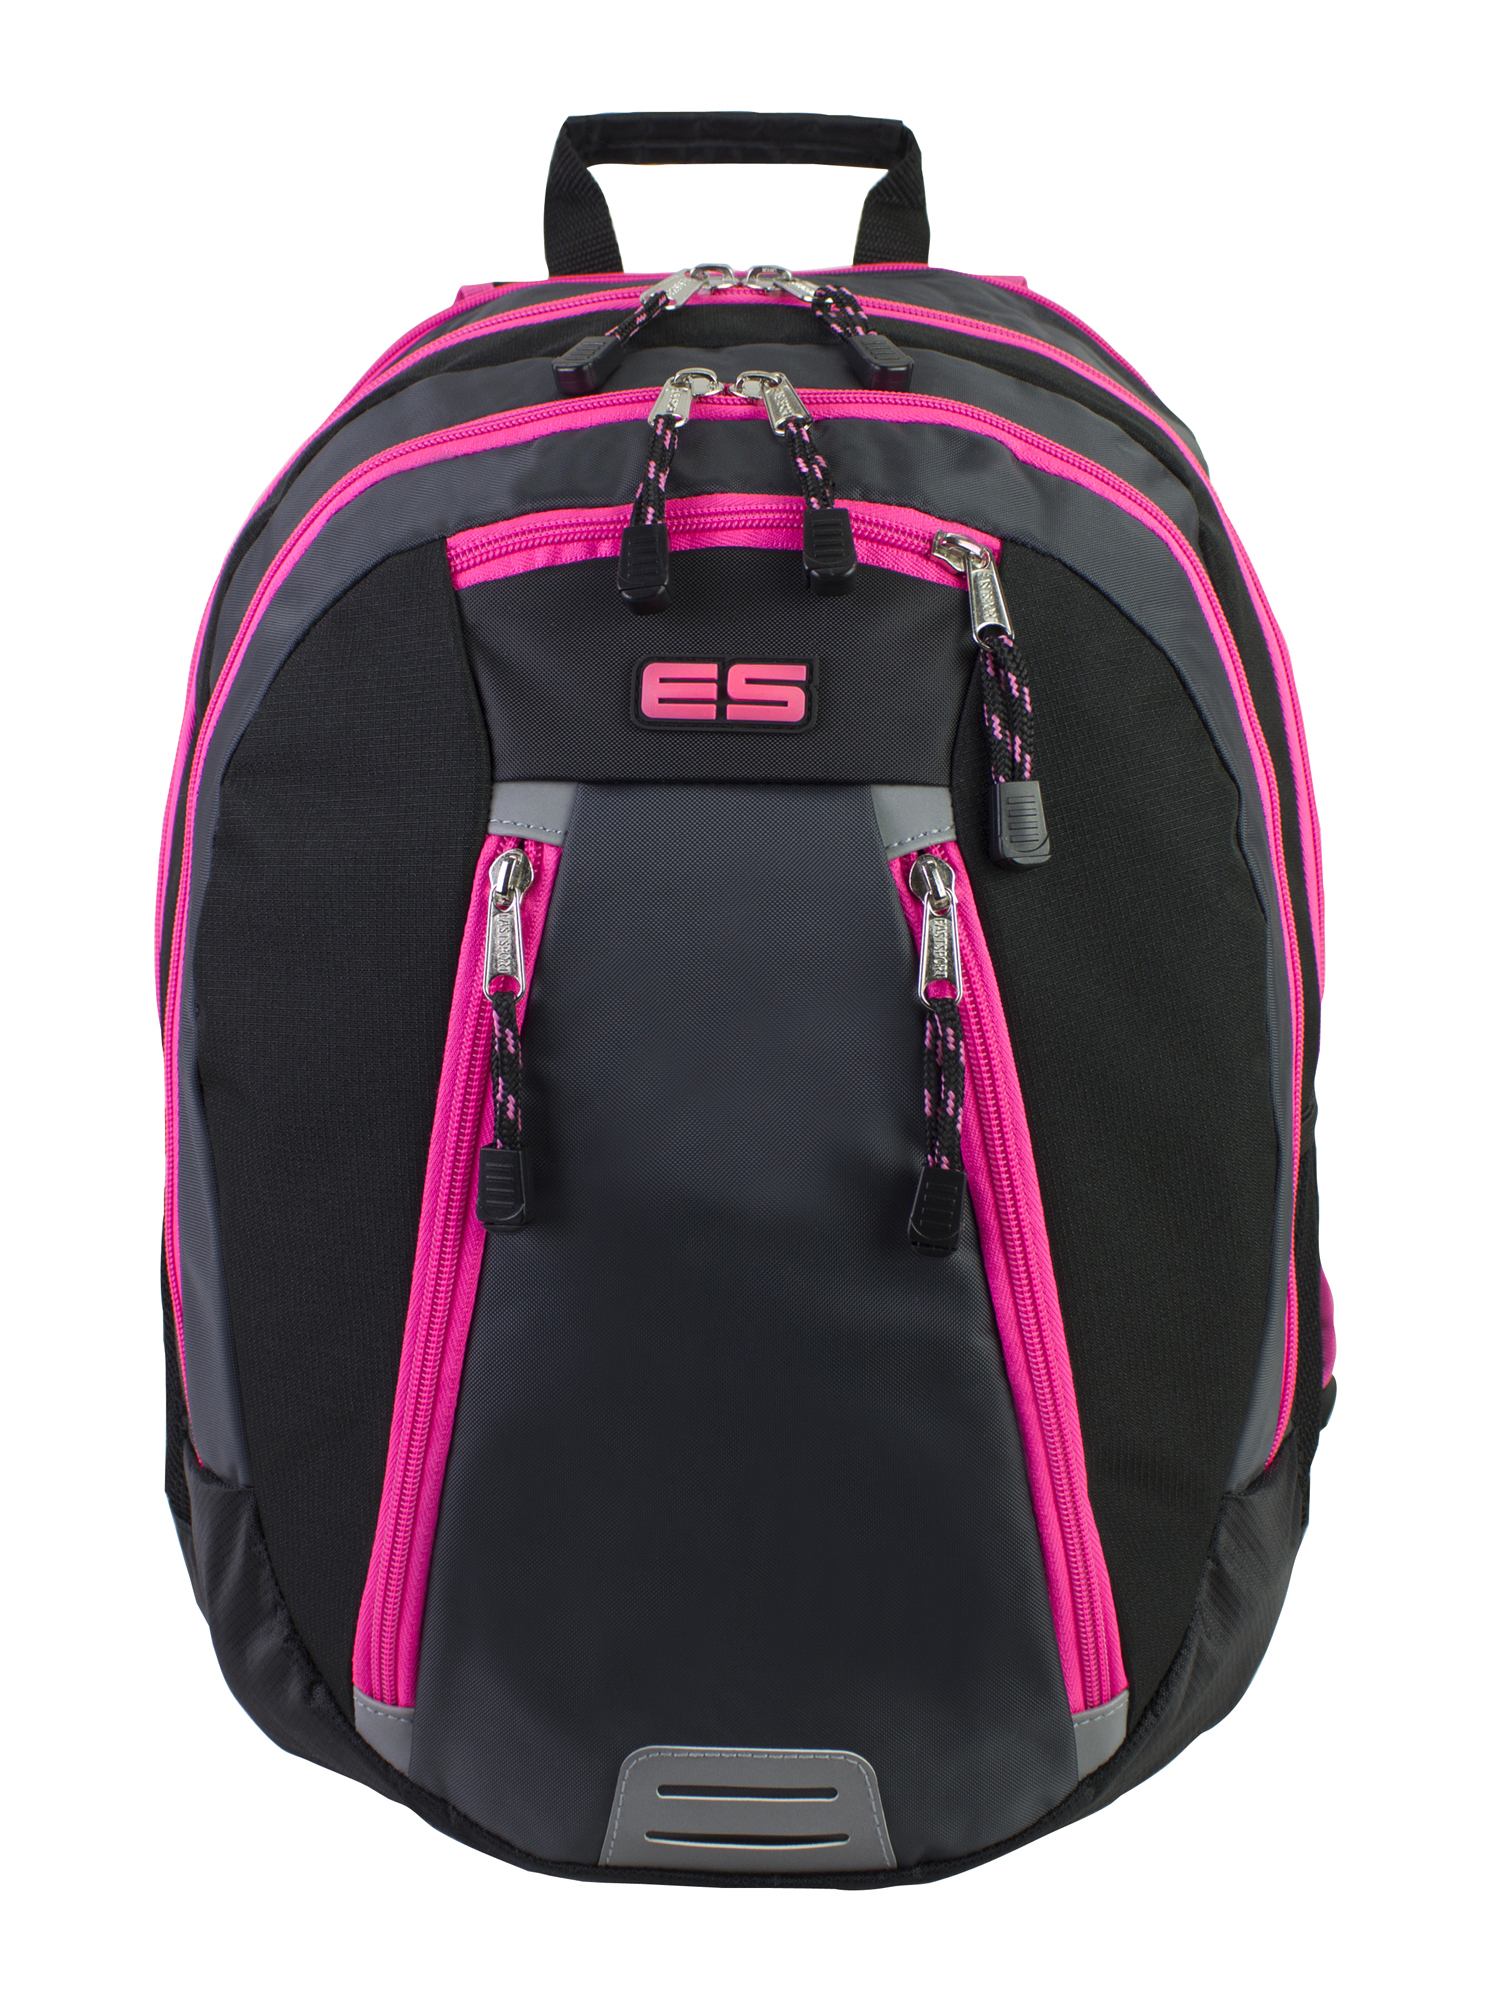 Eastsport Absolute Sport Backpack with 5 Compartments - image 4 of 4